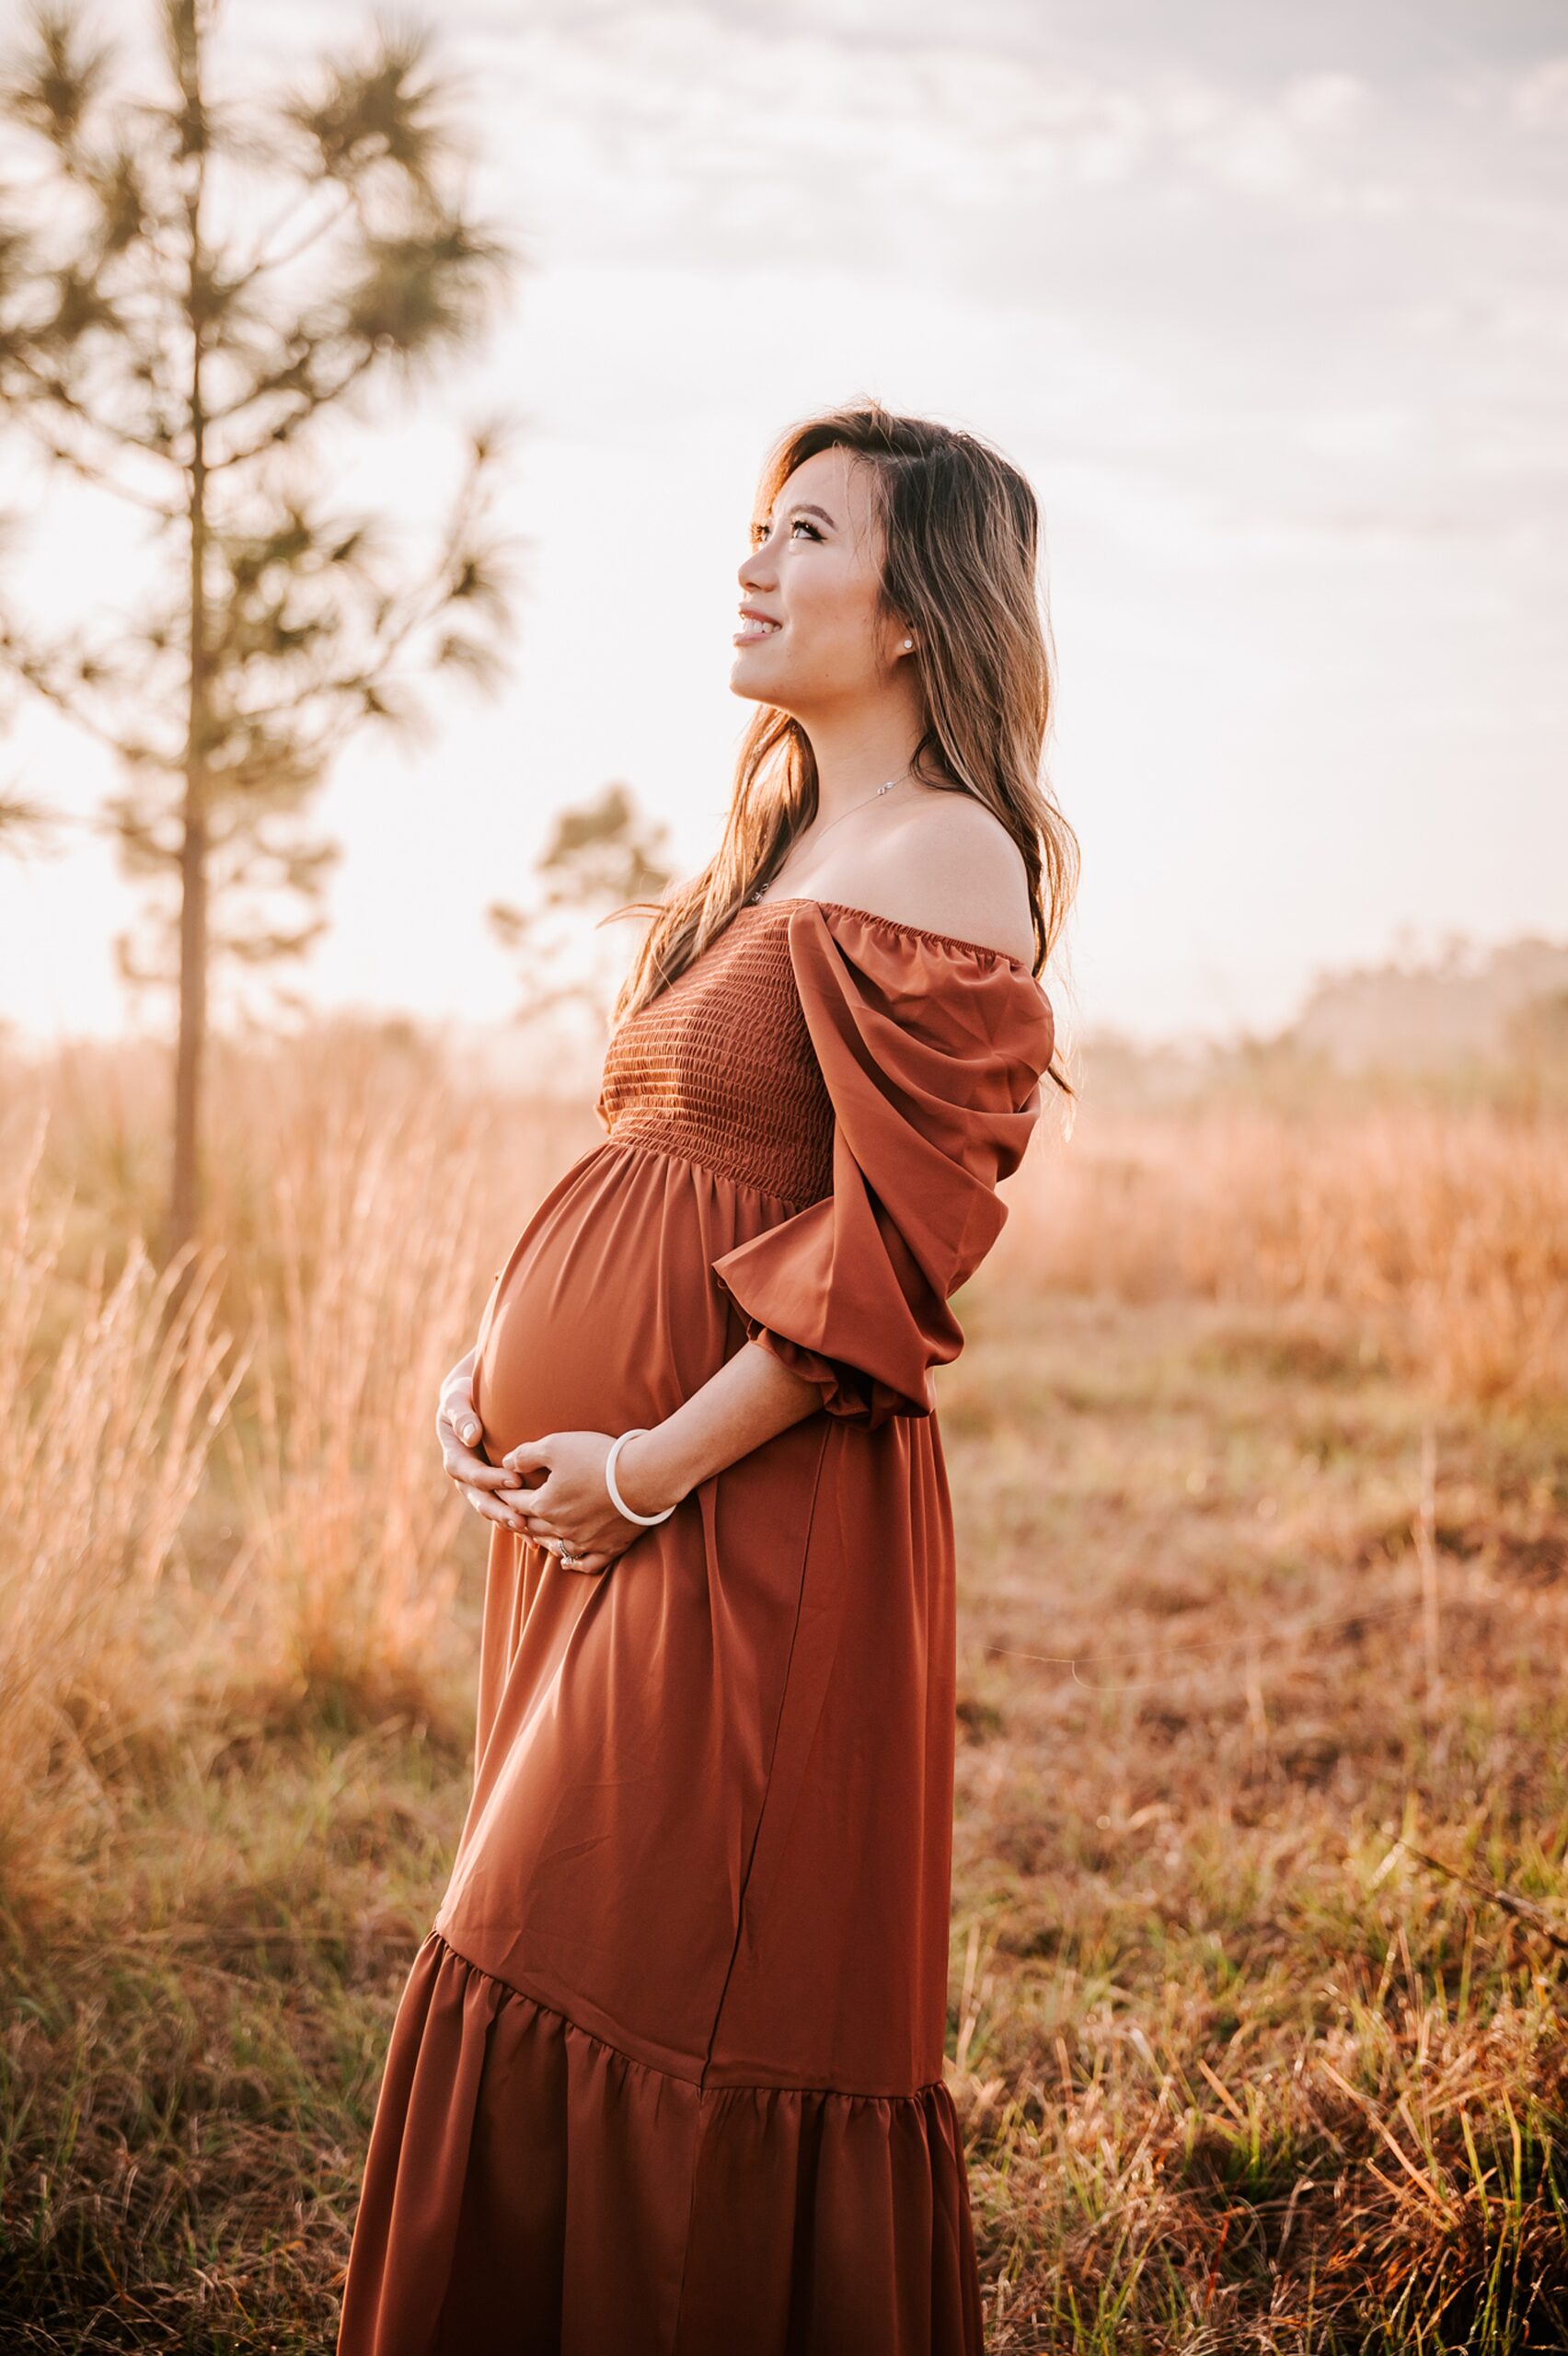 A mother to be holds her bump while looking up at the sky and standing in a field of tall golden grass at sunset wake forest obgyn